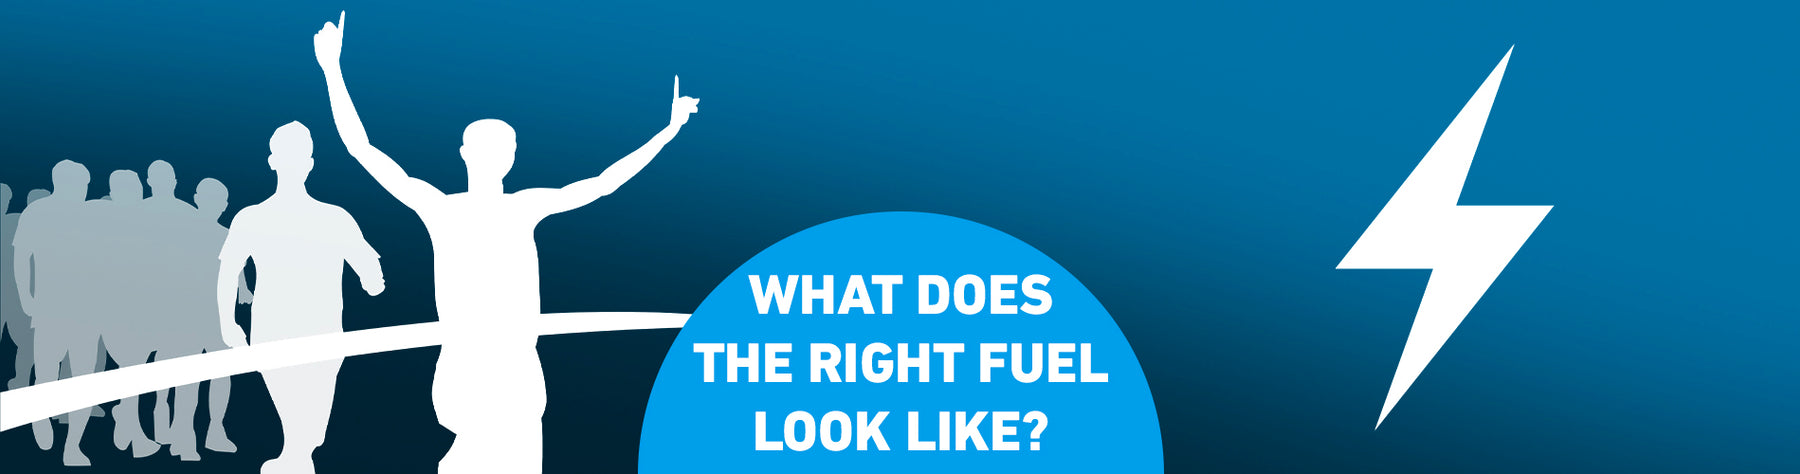 What does the right fuel look like for athletes?